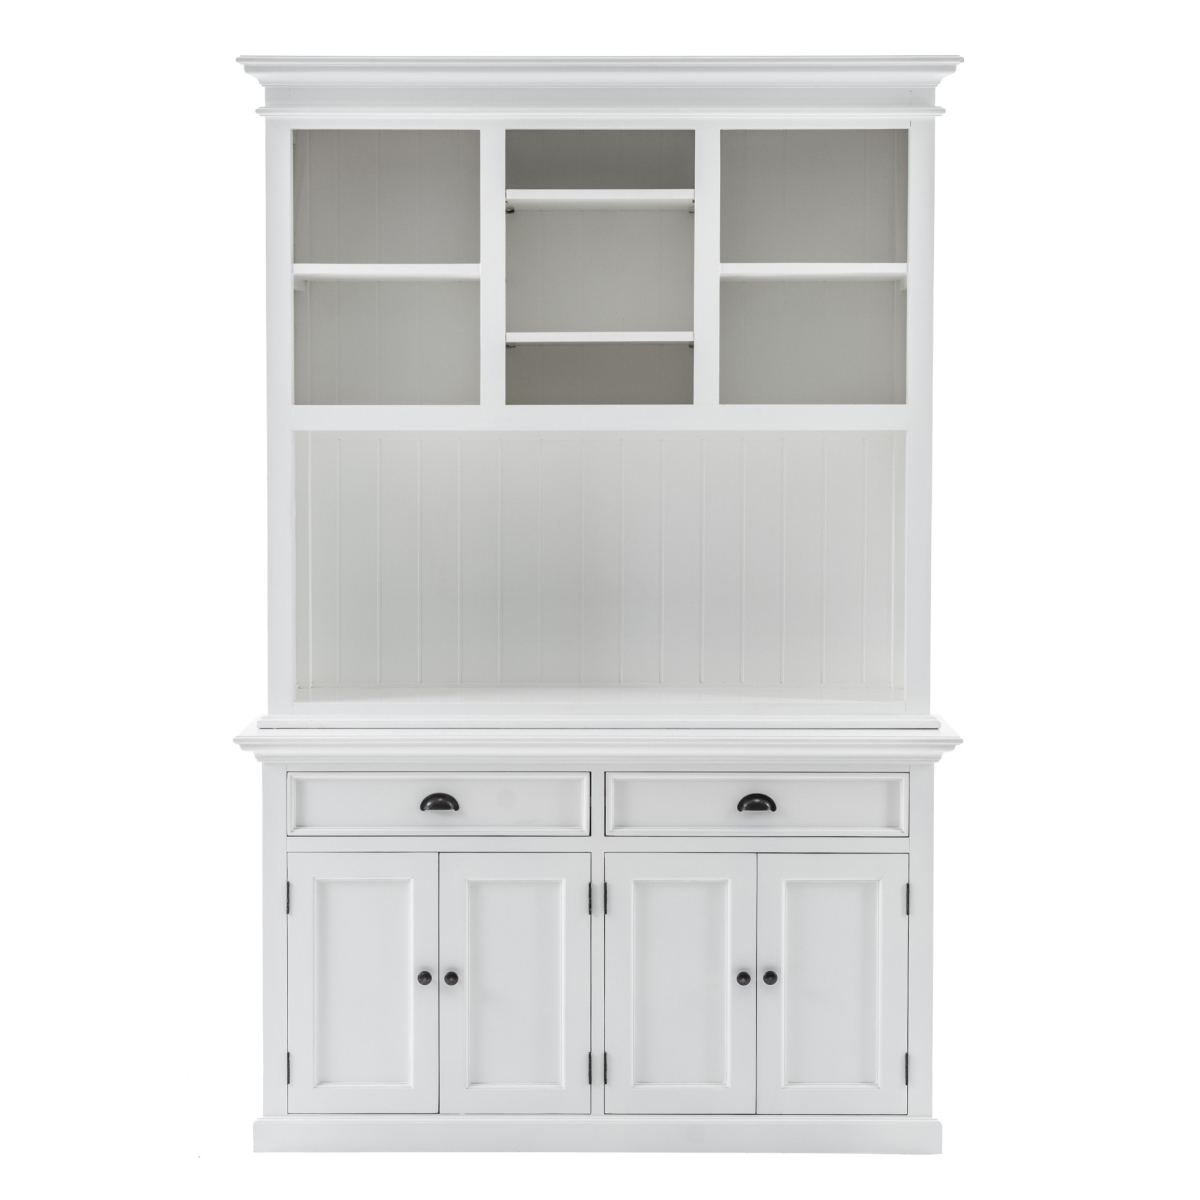 Picture of HomeRoots 397121 86.61 x 57.09 x 19.69 in. Classic White Buffet Hutch Unit with 2 Adjustable Shelves